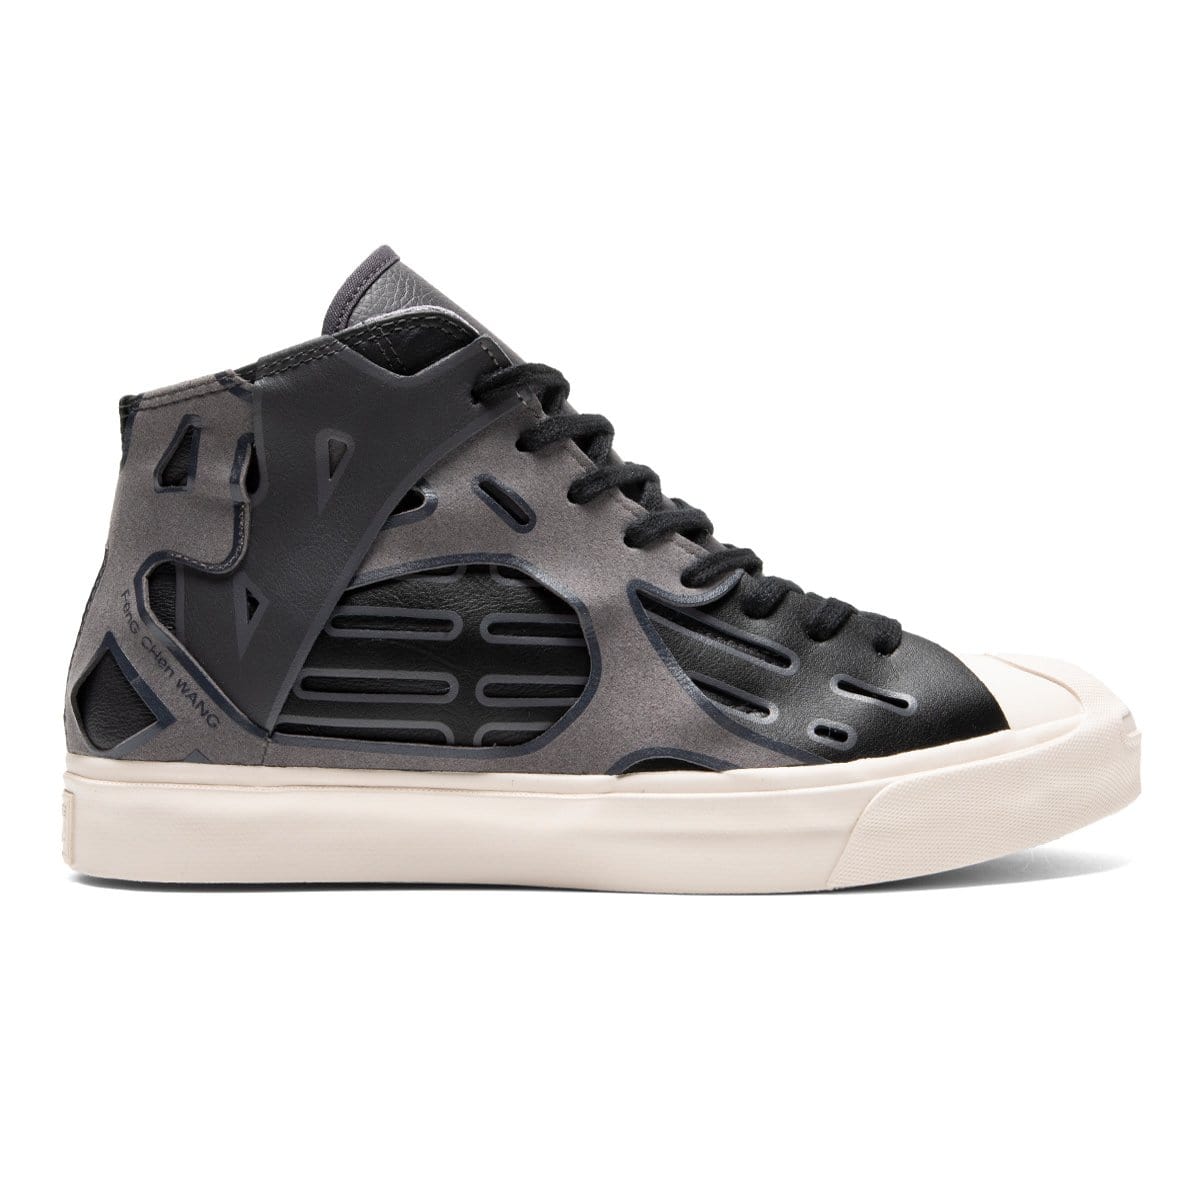 Converse Casual x Feng Chen Wang  JACK PURCELL MID